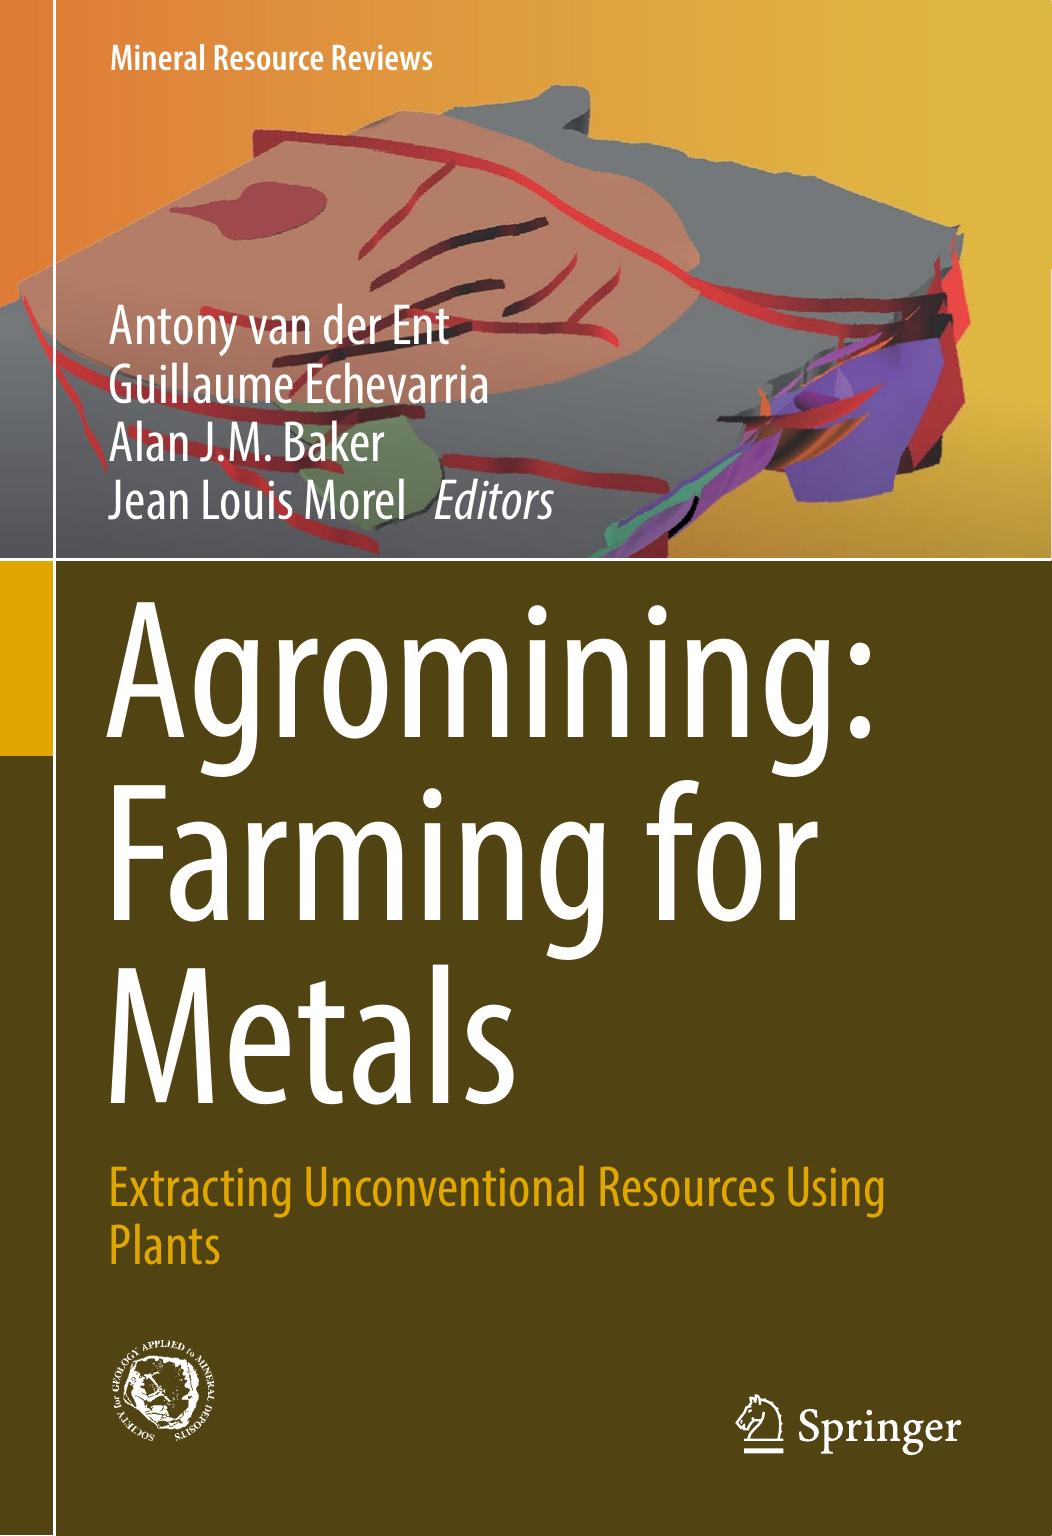 Agromining Farming for Metals Extracting Unconventional Resources Using Plants 2018